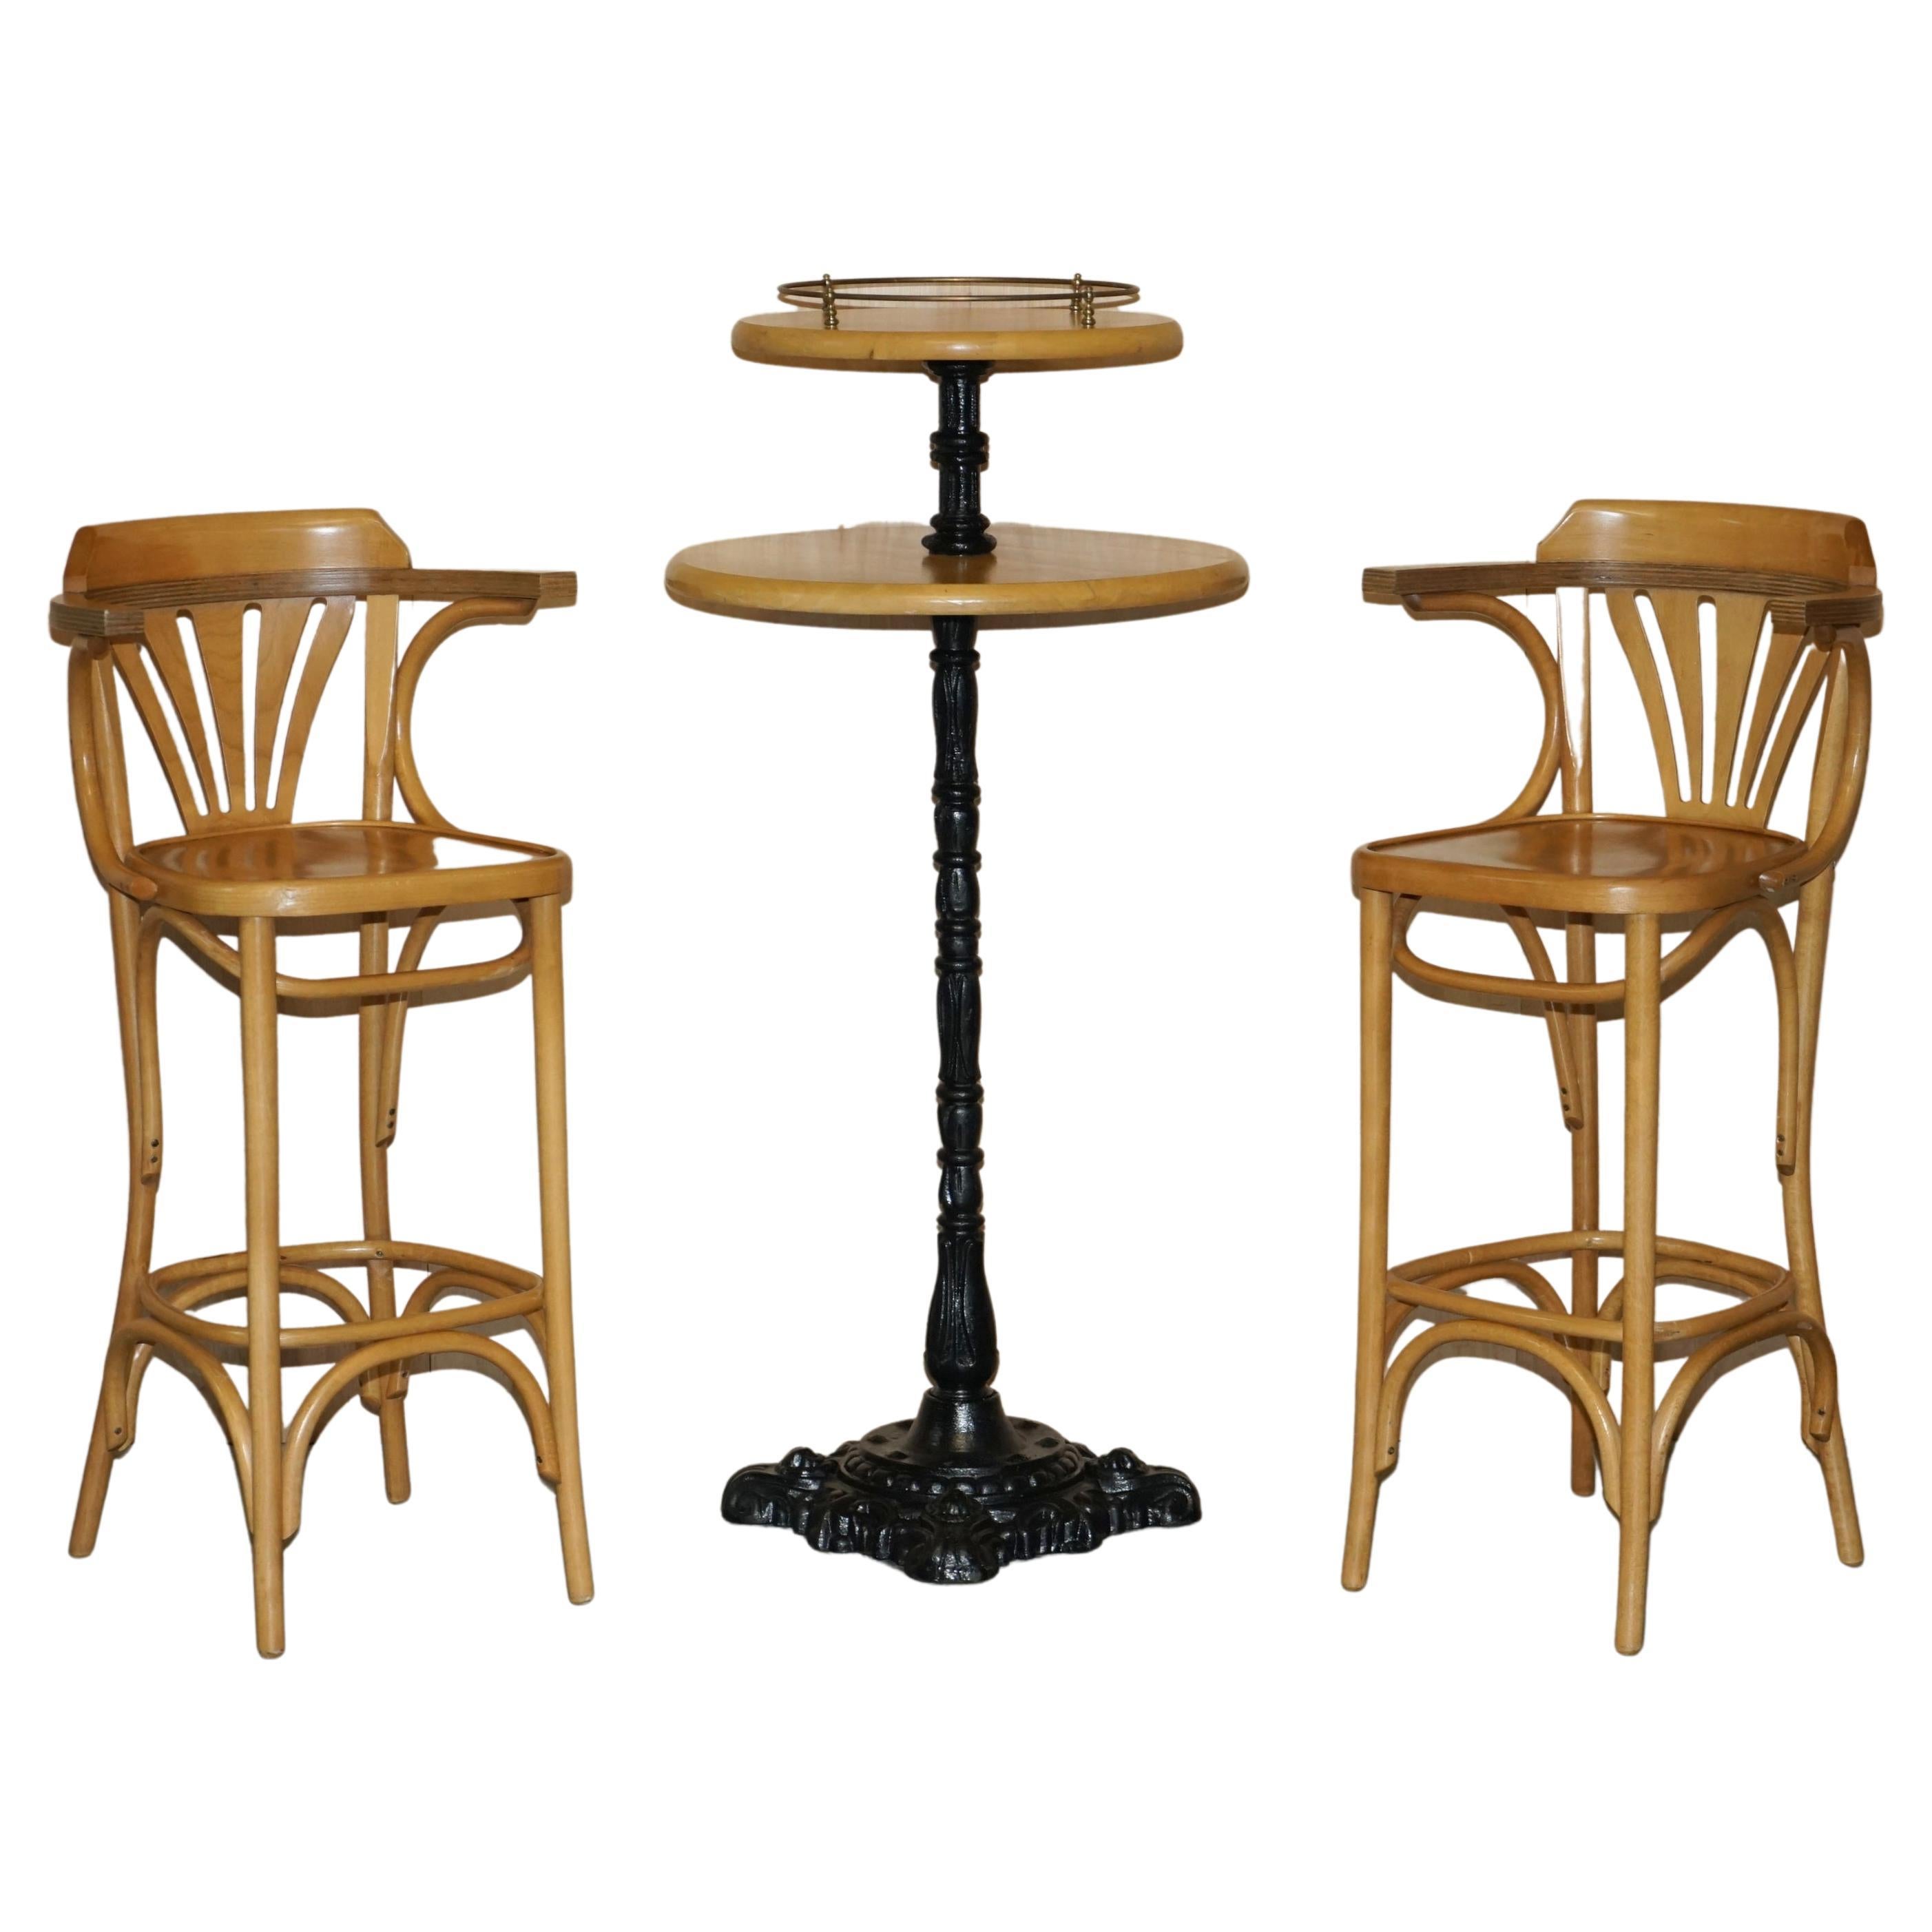 LOVELY PAIR OF BENTWOOD THONET BAR STOOLS + CAST IRON COCKTAiL BAR TABLE